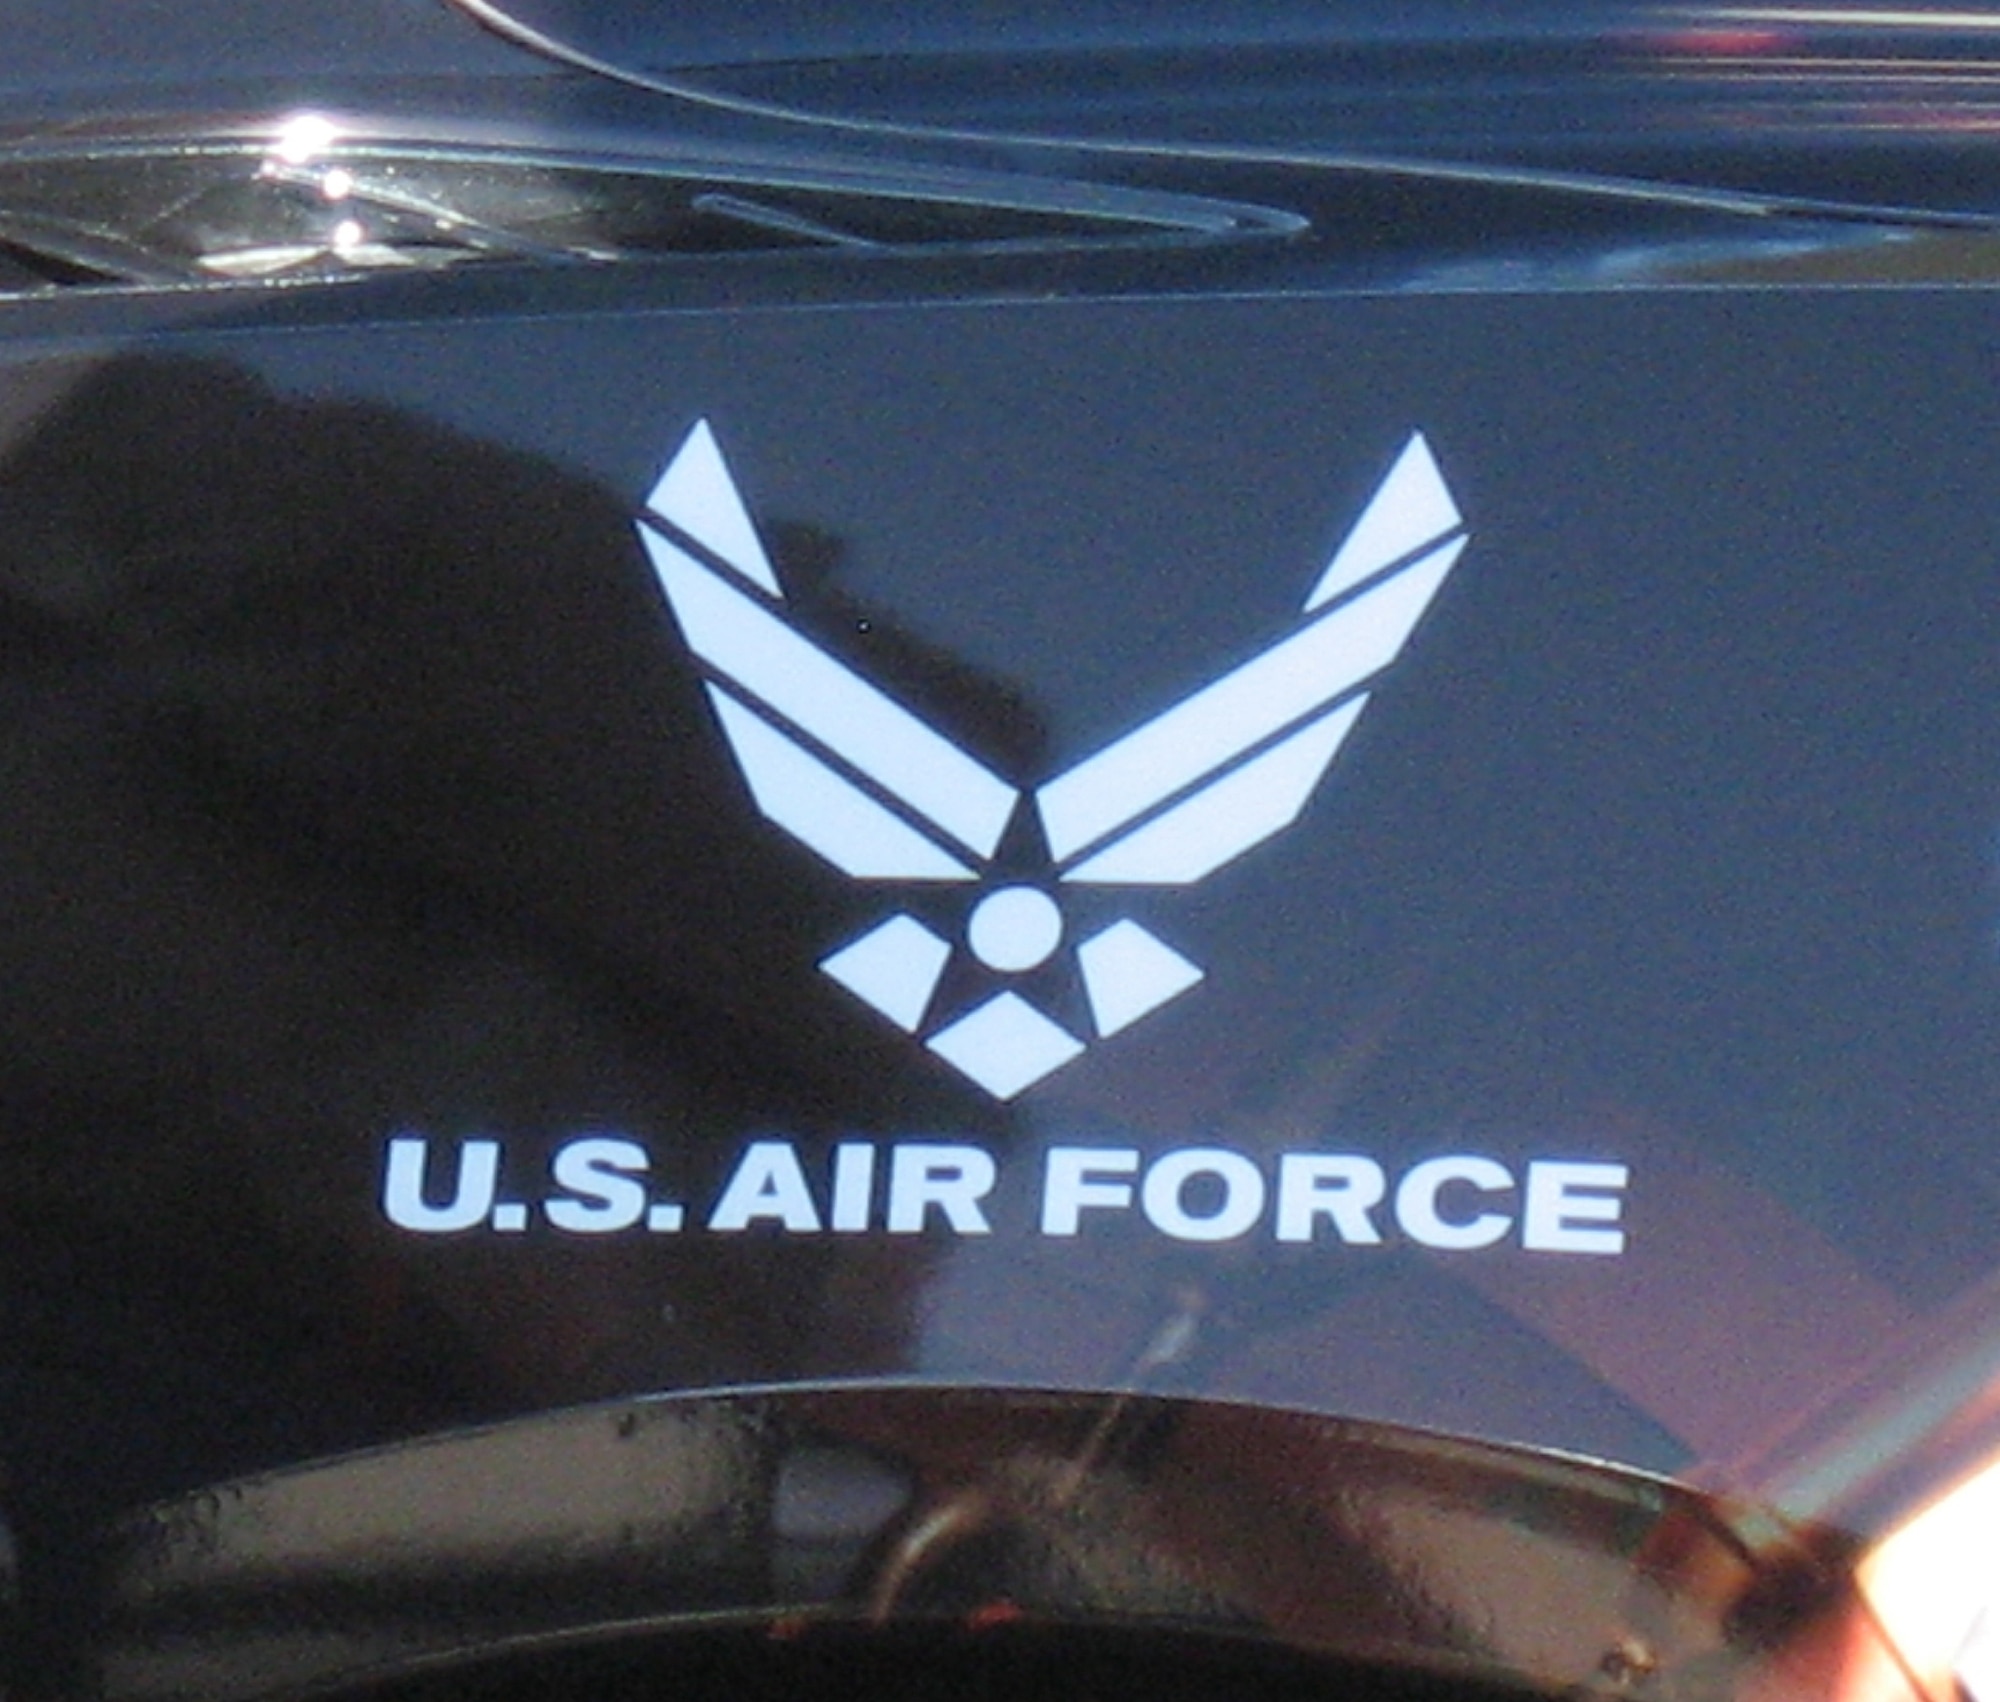 The U.S. Air Force logo is displayed on the back corner panel of the Semi-Autonomous Motorcar known as SAM.  The 711 Human Performance Wing was one of the organizations involved in the project. (USAF photo by Ted Theopolos)